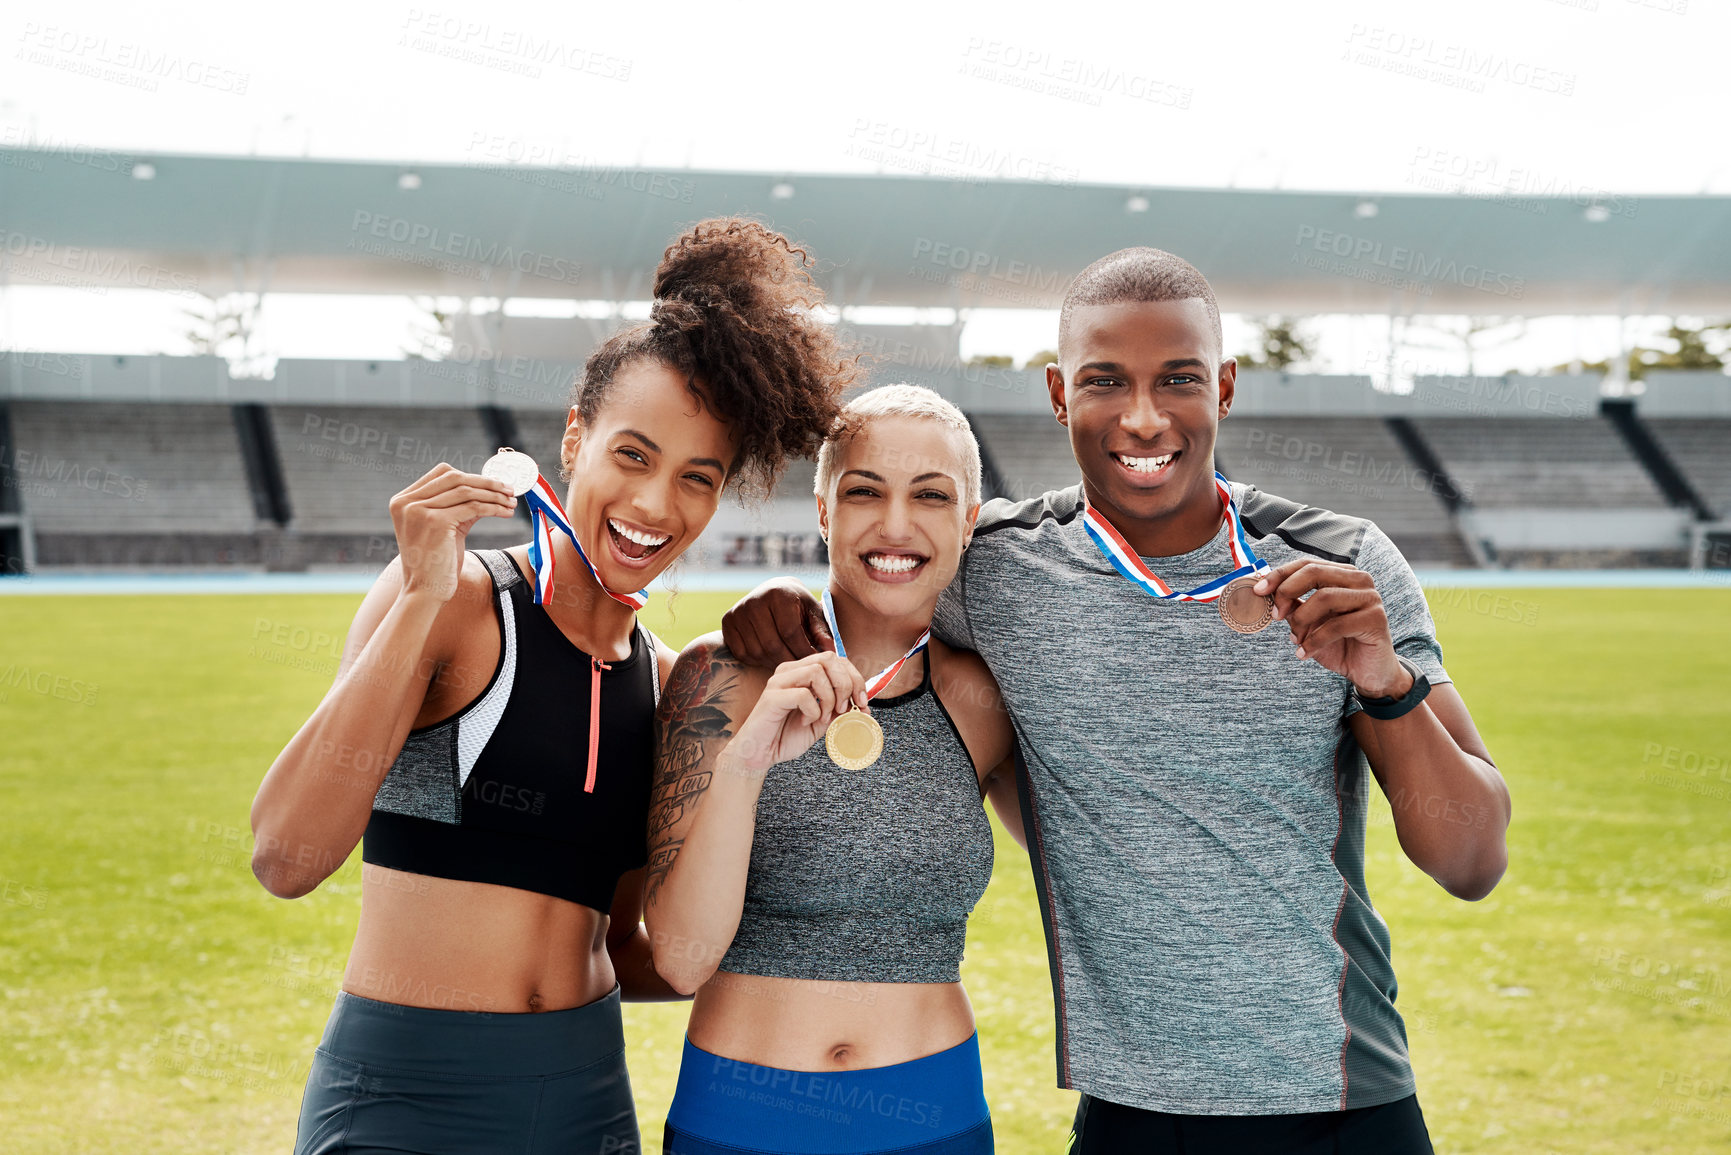 Buy stock photo Cropped portrait of a diverse group of athletes standing together and holding up medals after winning a running race